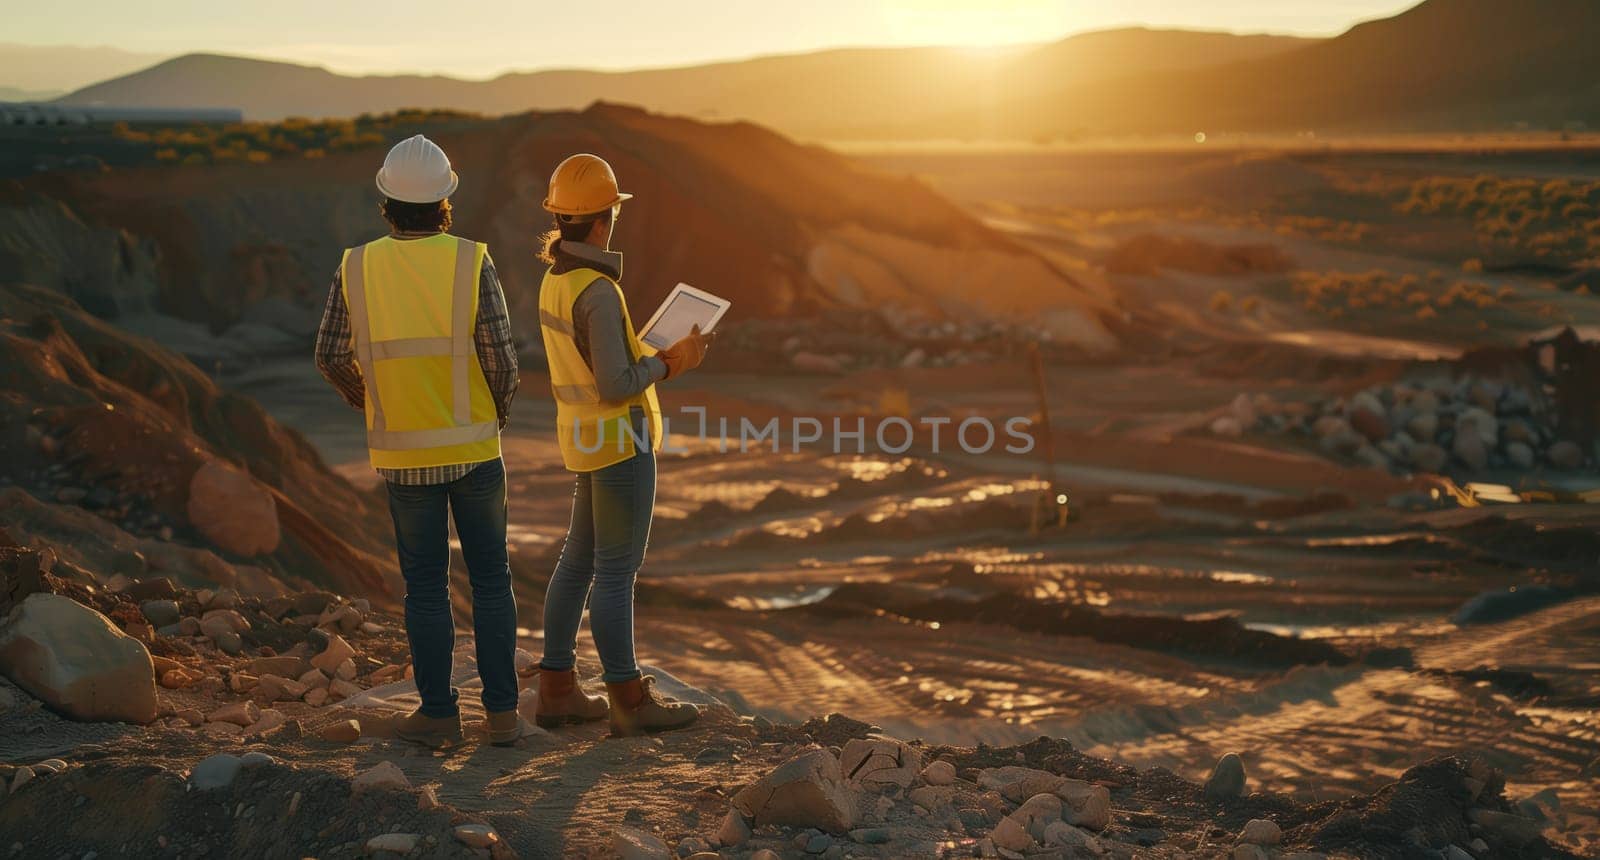 Two construction workers standing on a dirt hill, gazing at a tablet against a backdrop of the sky and mountains, happy in the natural landscape